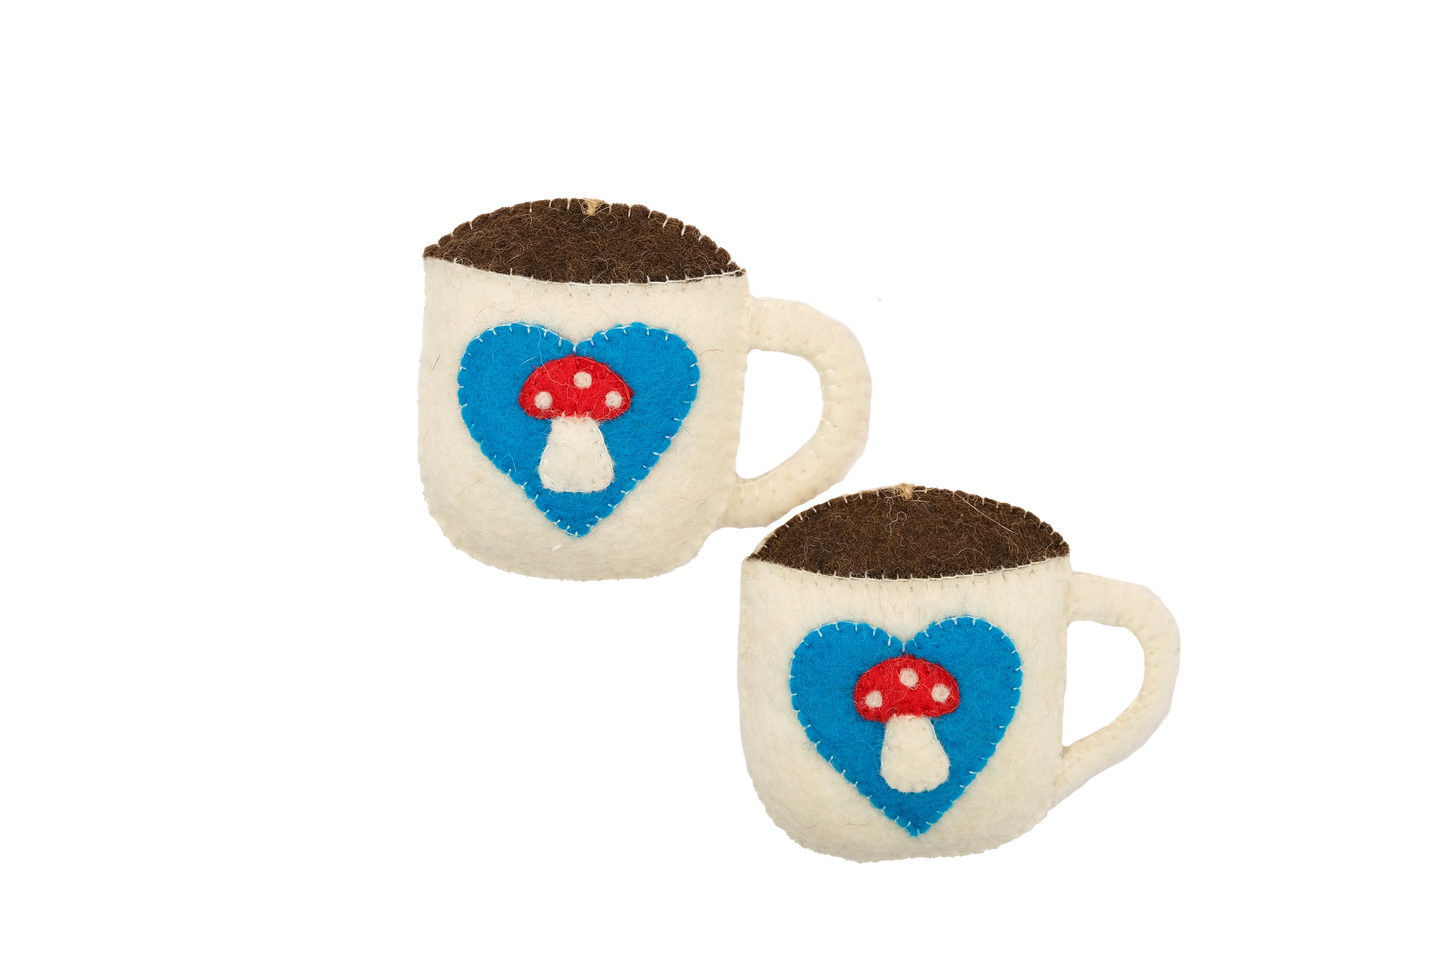 This Global Groove Life, handmade, ethical, fair trade, eco-friendly, sustainable, felt, turquoise, red and white coffee cup ornament set was created by artisans in Kathmandu Nepal and will bring colorful warmth and fun to your Christmas tree this season.